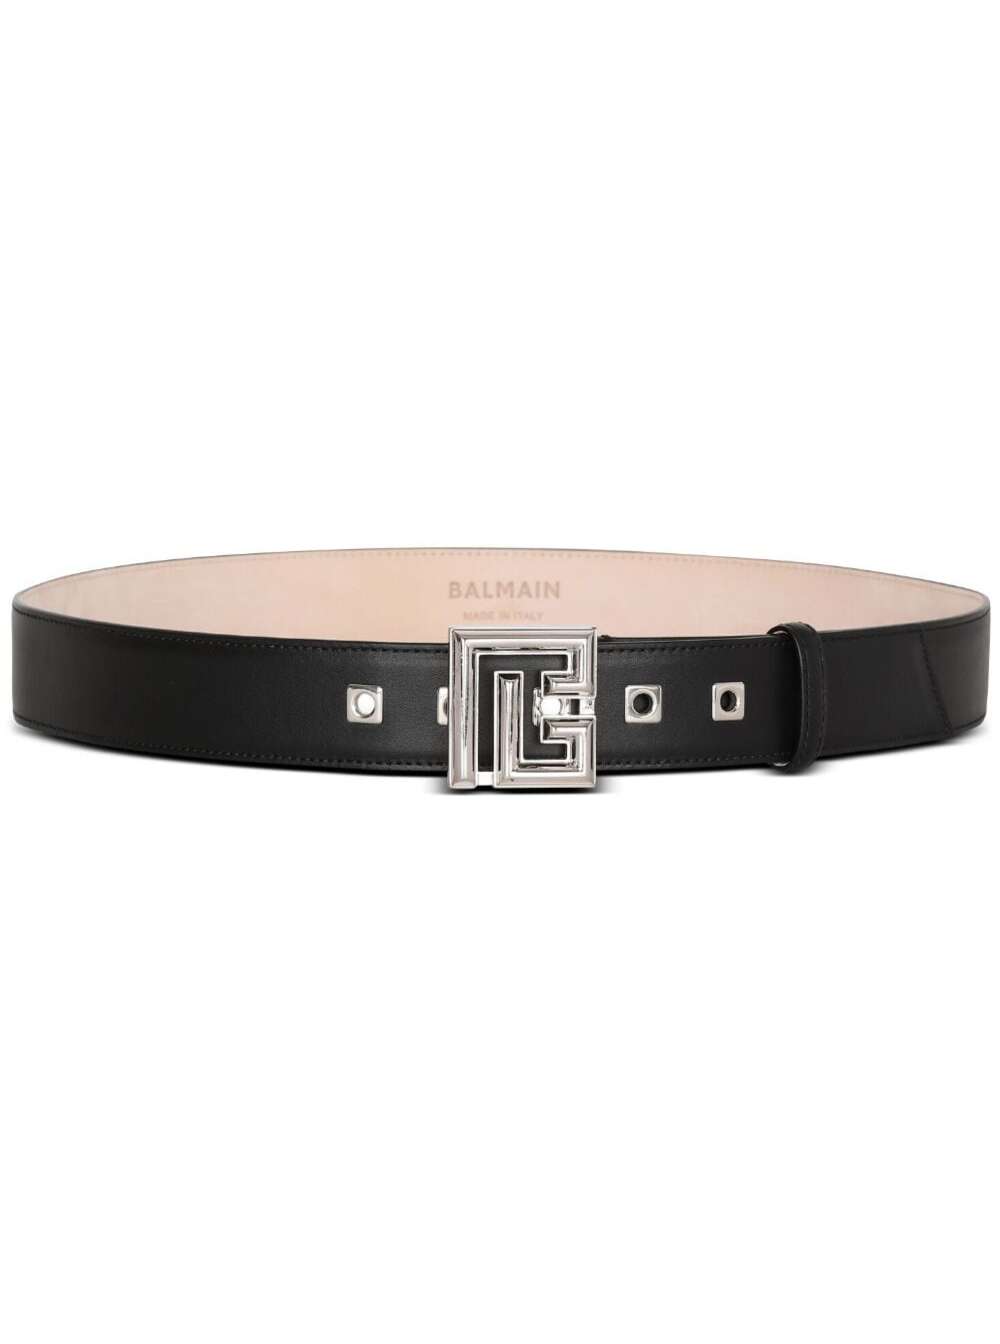 BALMAIN BLACK BELT WITH LOGO BUCKLE IN SMOOTH LEATHER MAN